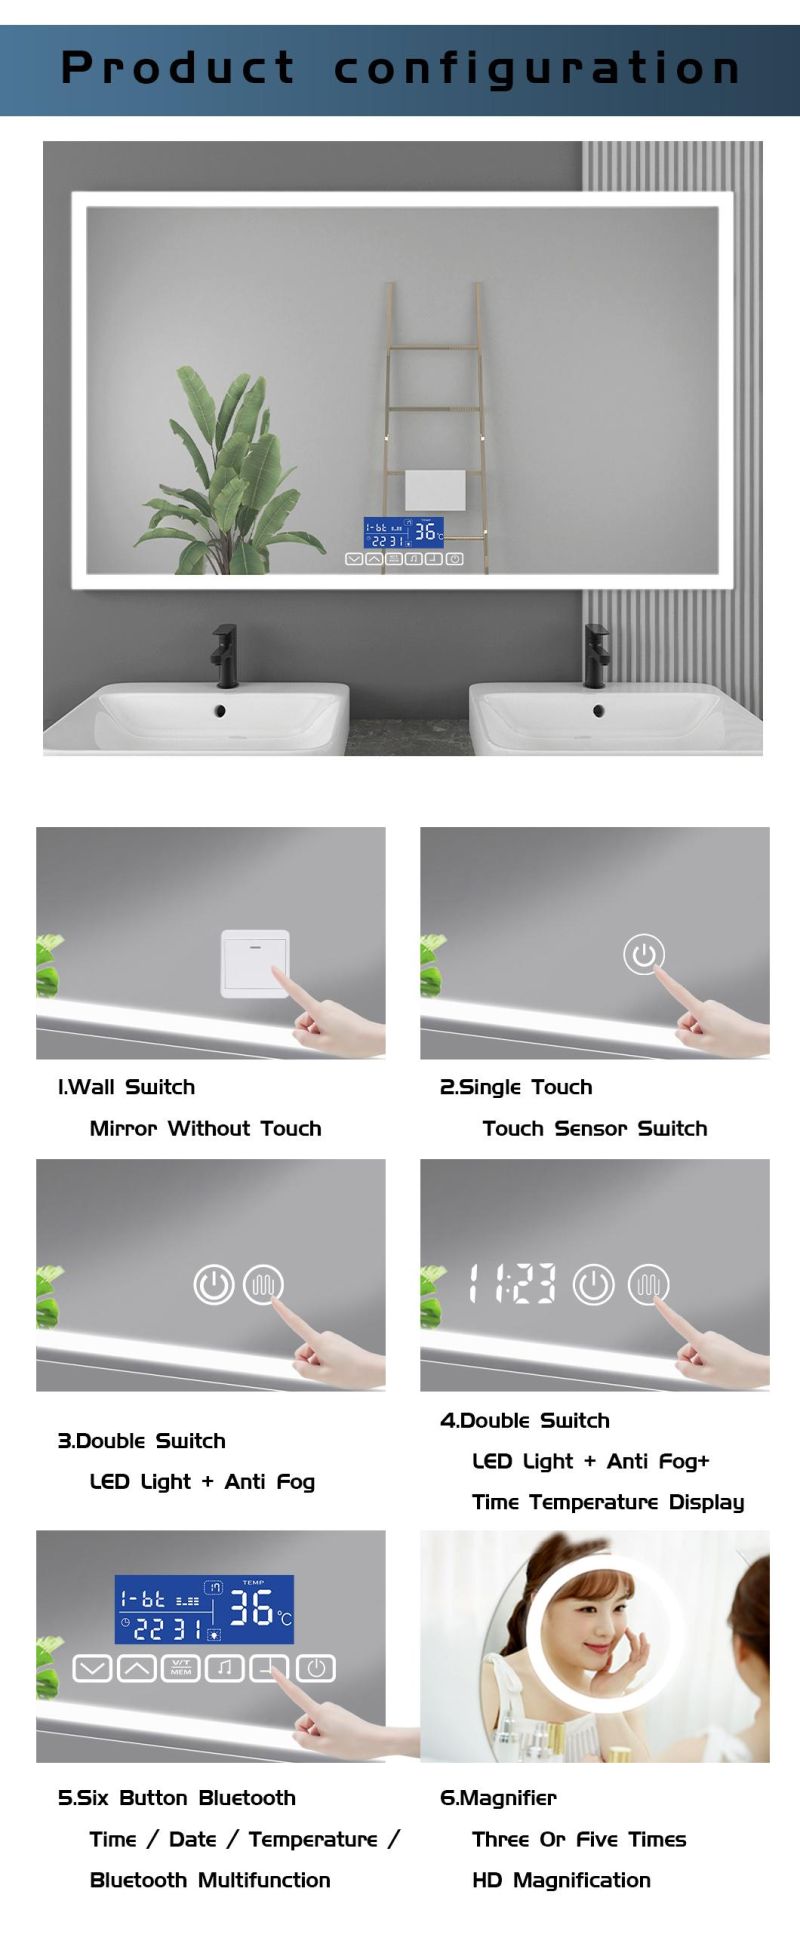 Hotel LED Wall Mirrors Frameless Bath Mirrors Bathroom Lighted Glass Mirror with Waterproof IP44 Rating